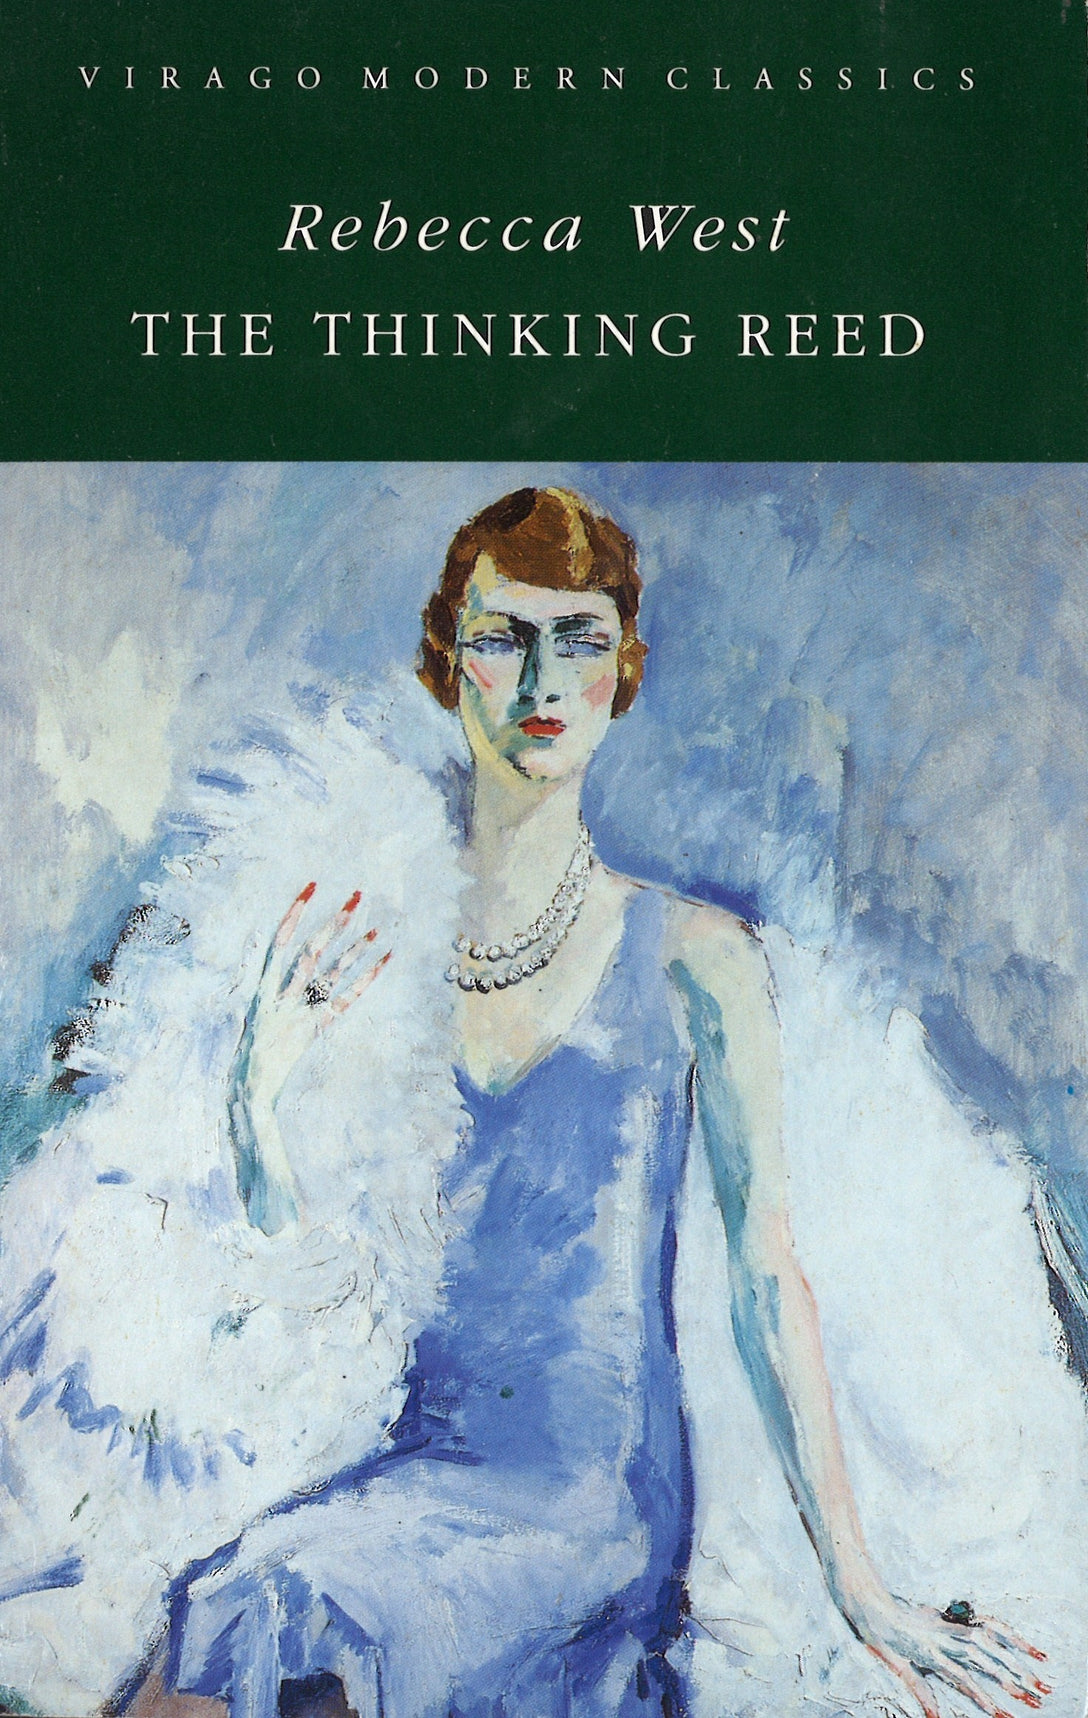 The Thinking Reed by Rebecca West